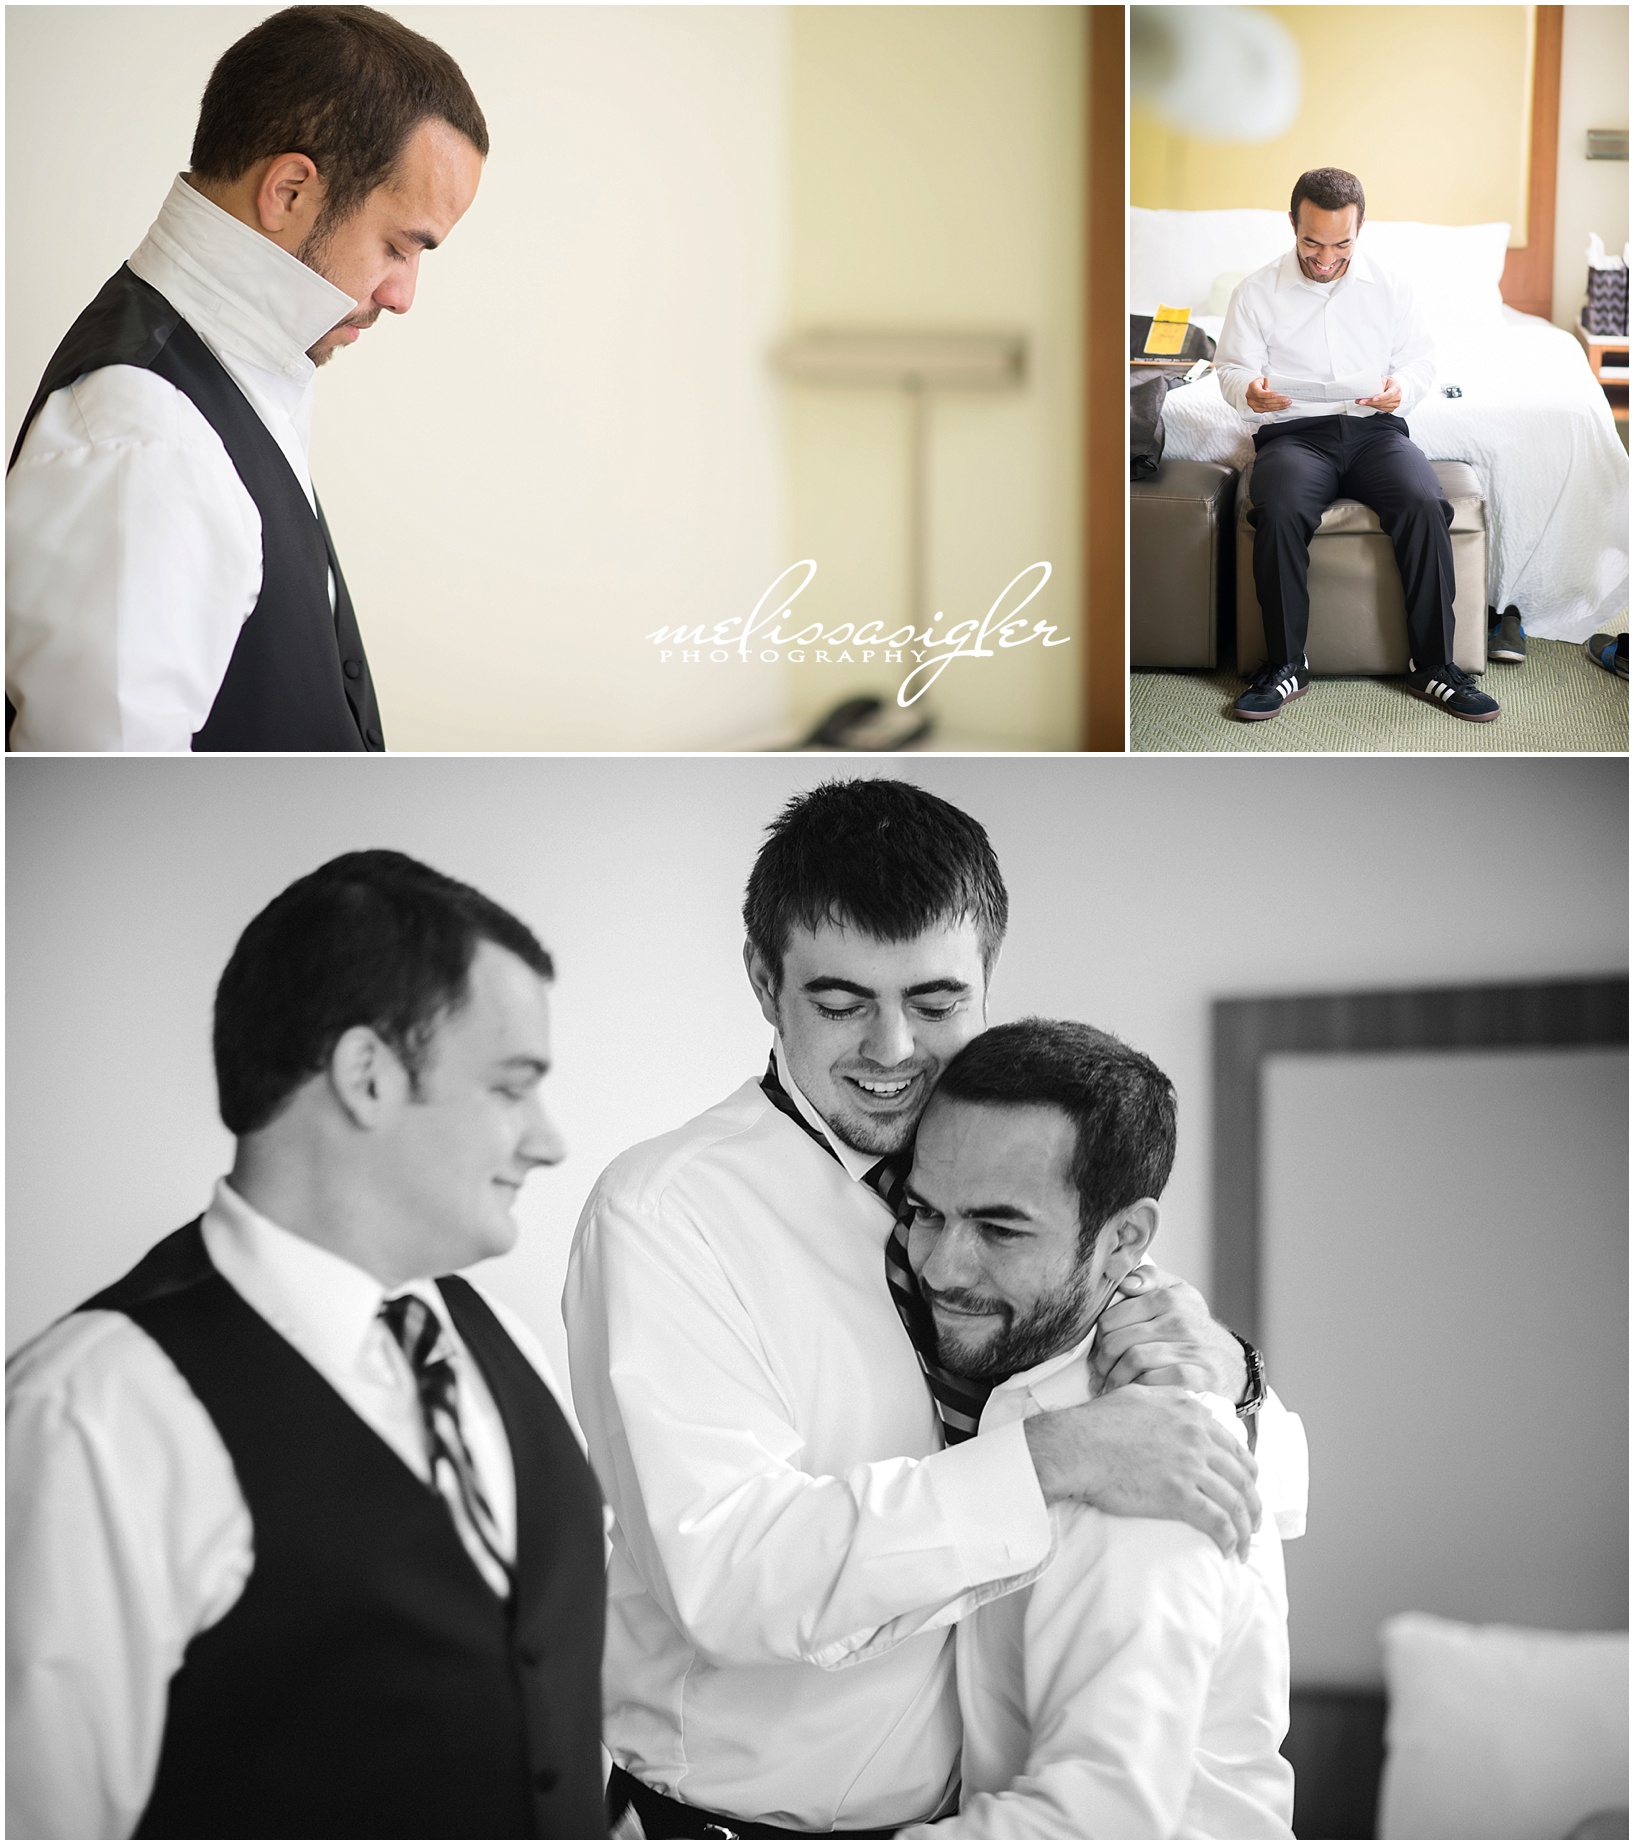 Wedding preparation at Springhill Suites by Lawrence wedding photographer Melissa Sigler